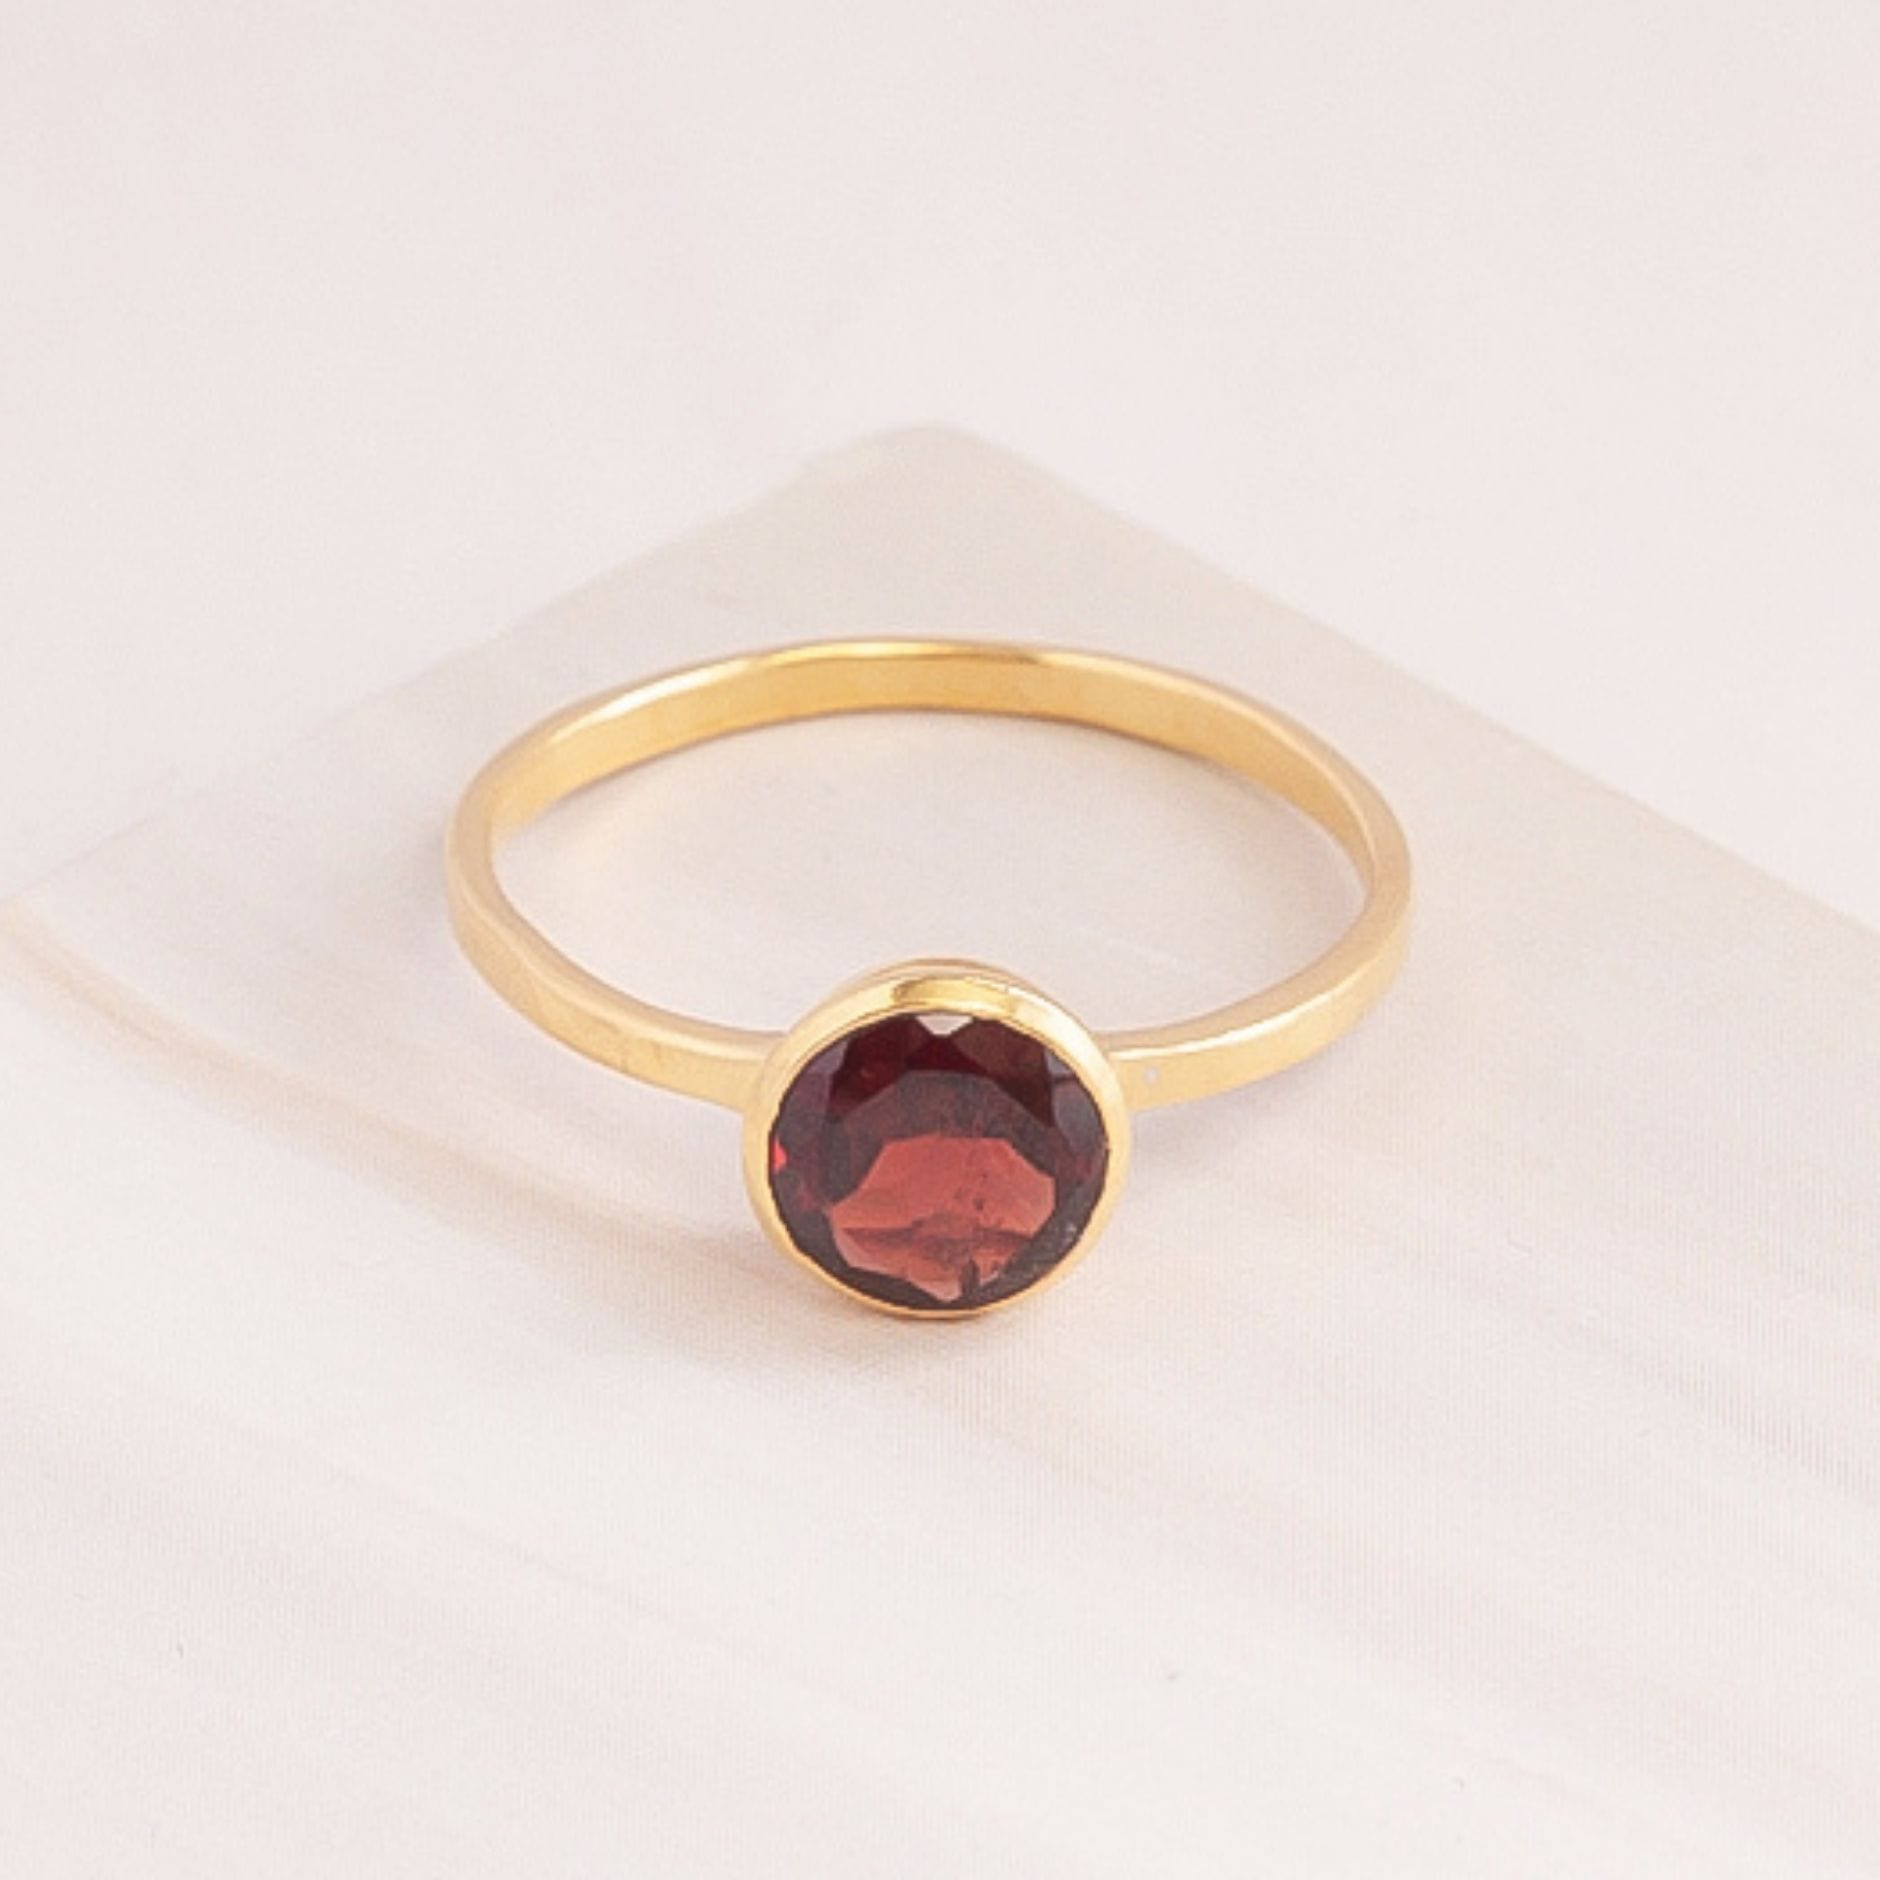 Emblem Jewelry Rings Red Garnet / Round Signature Candy Gemstone Stack Rings (Ring Size 9)